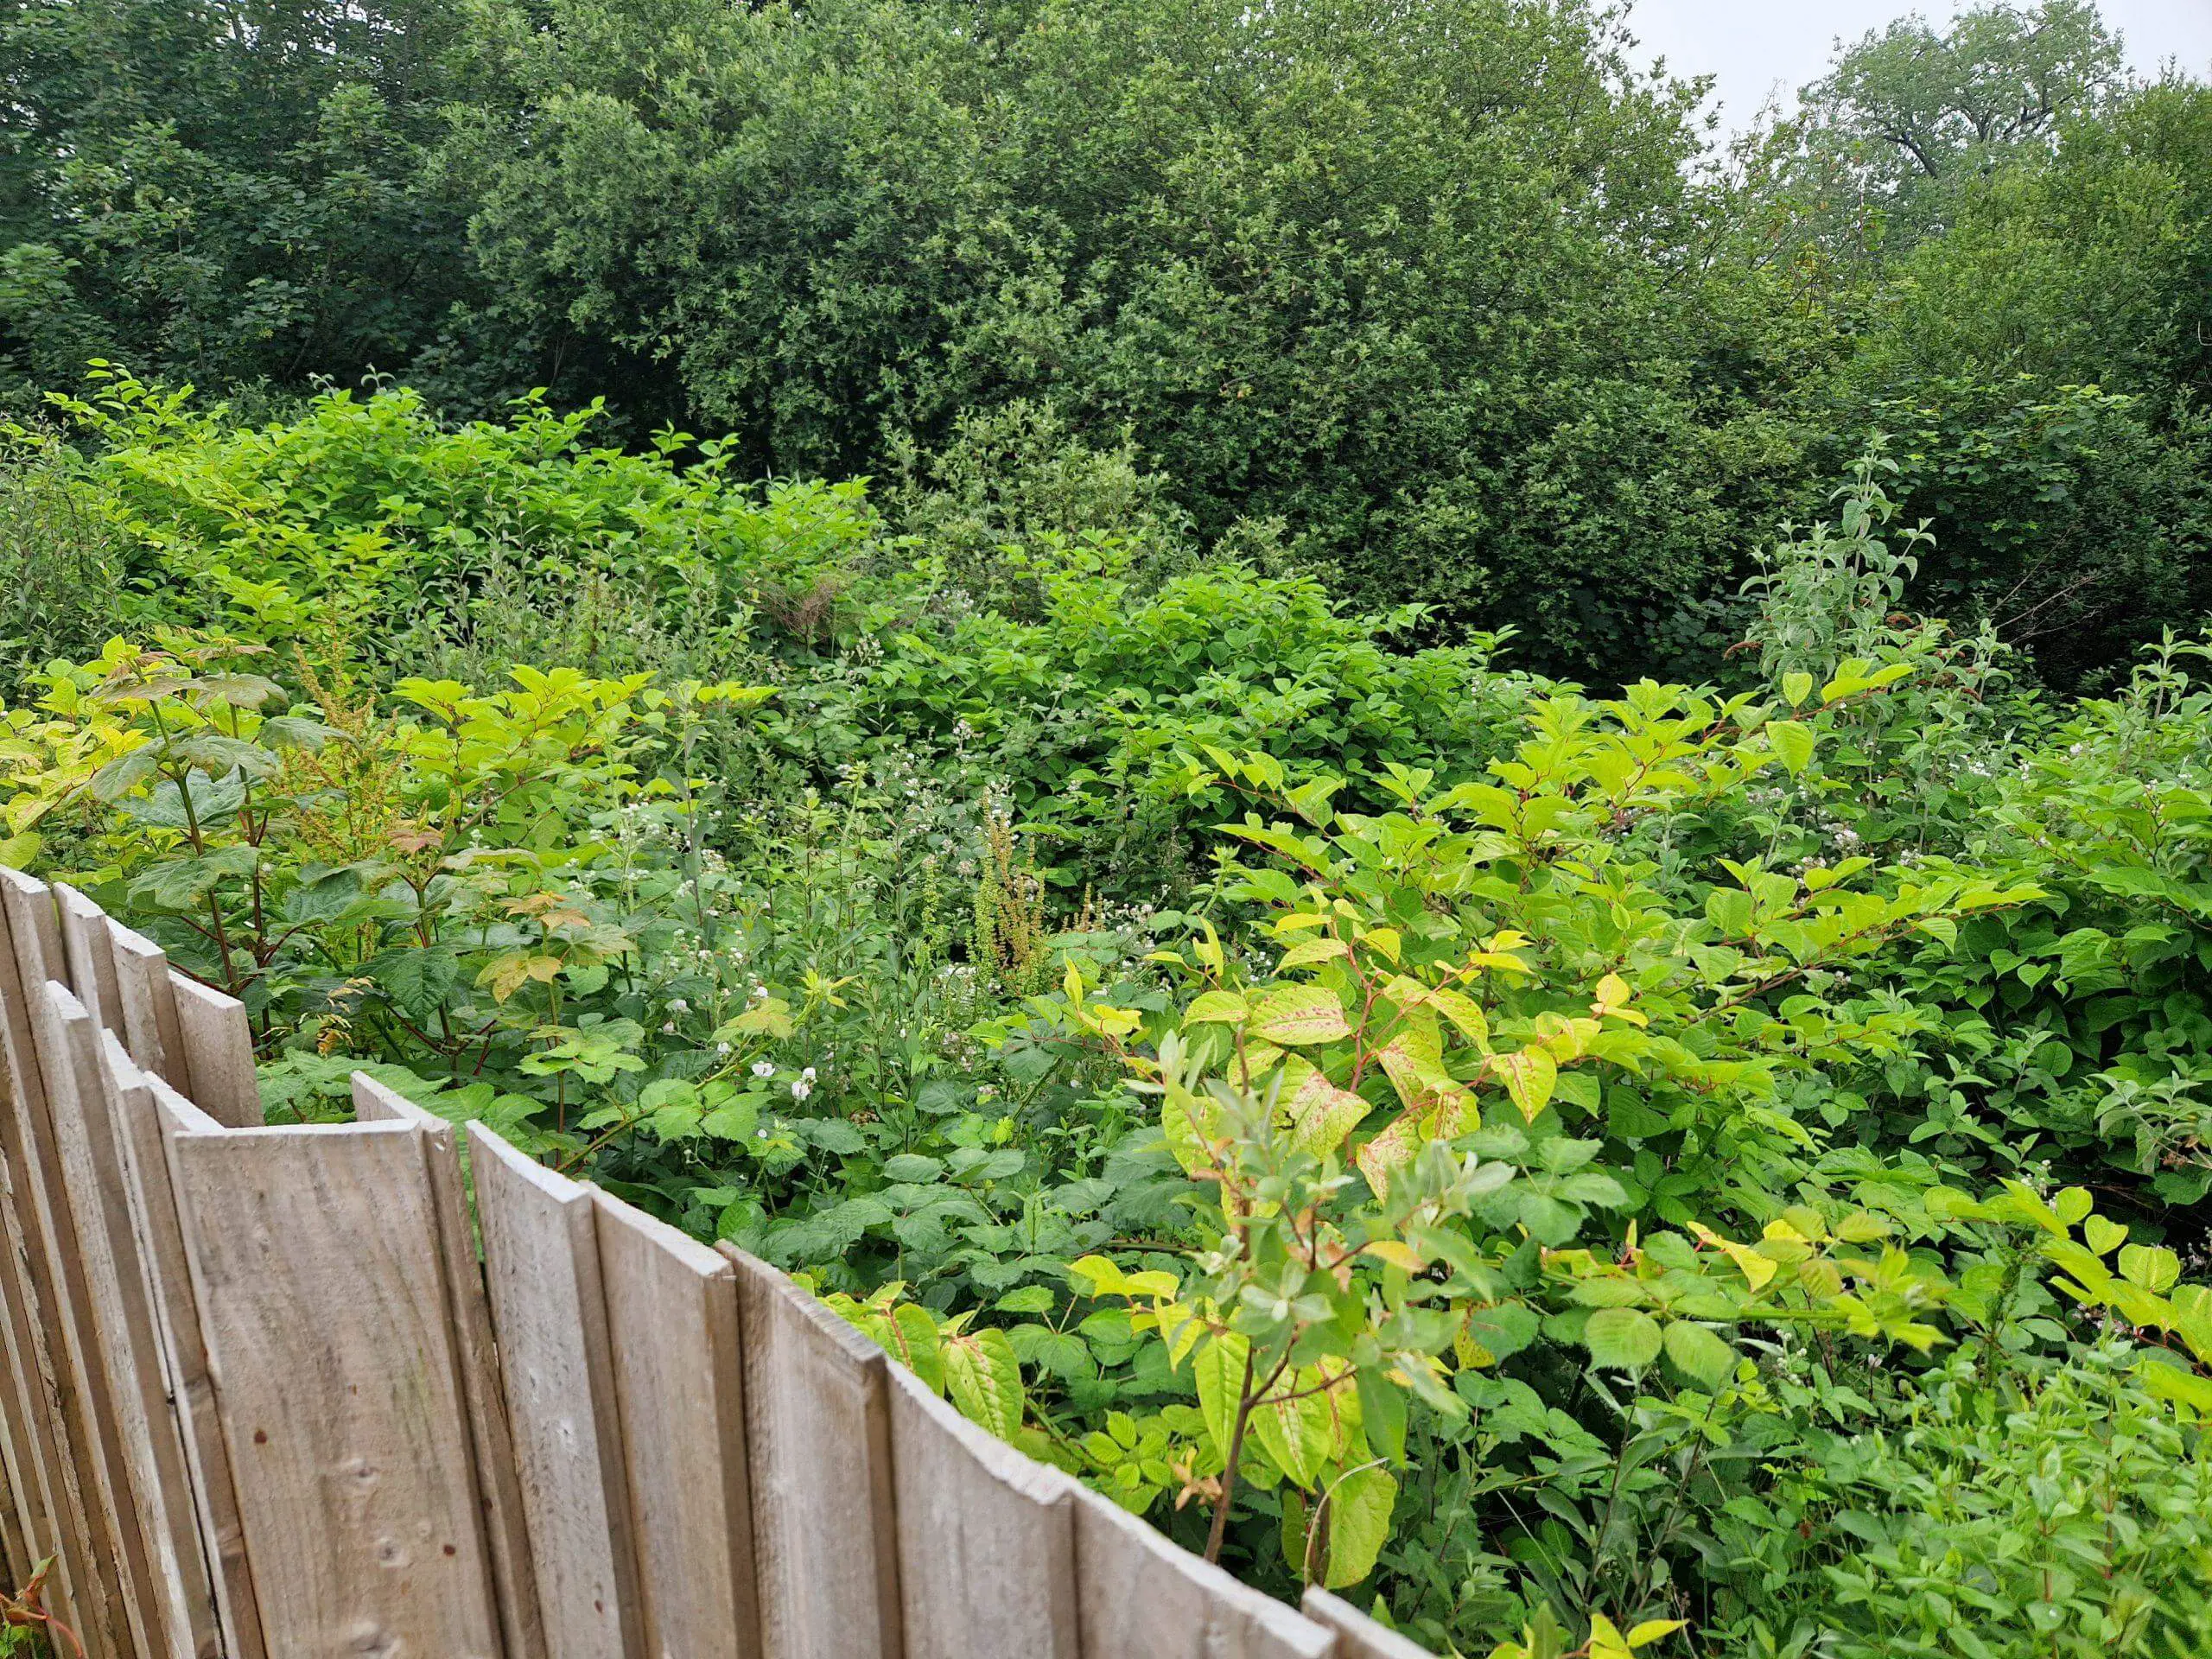 Japanese knotweed pressing against a boundary